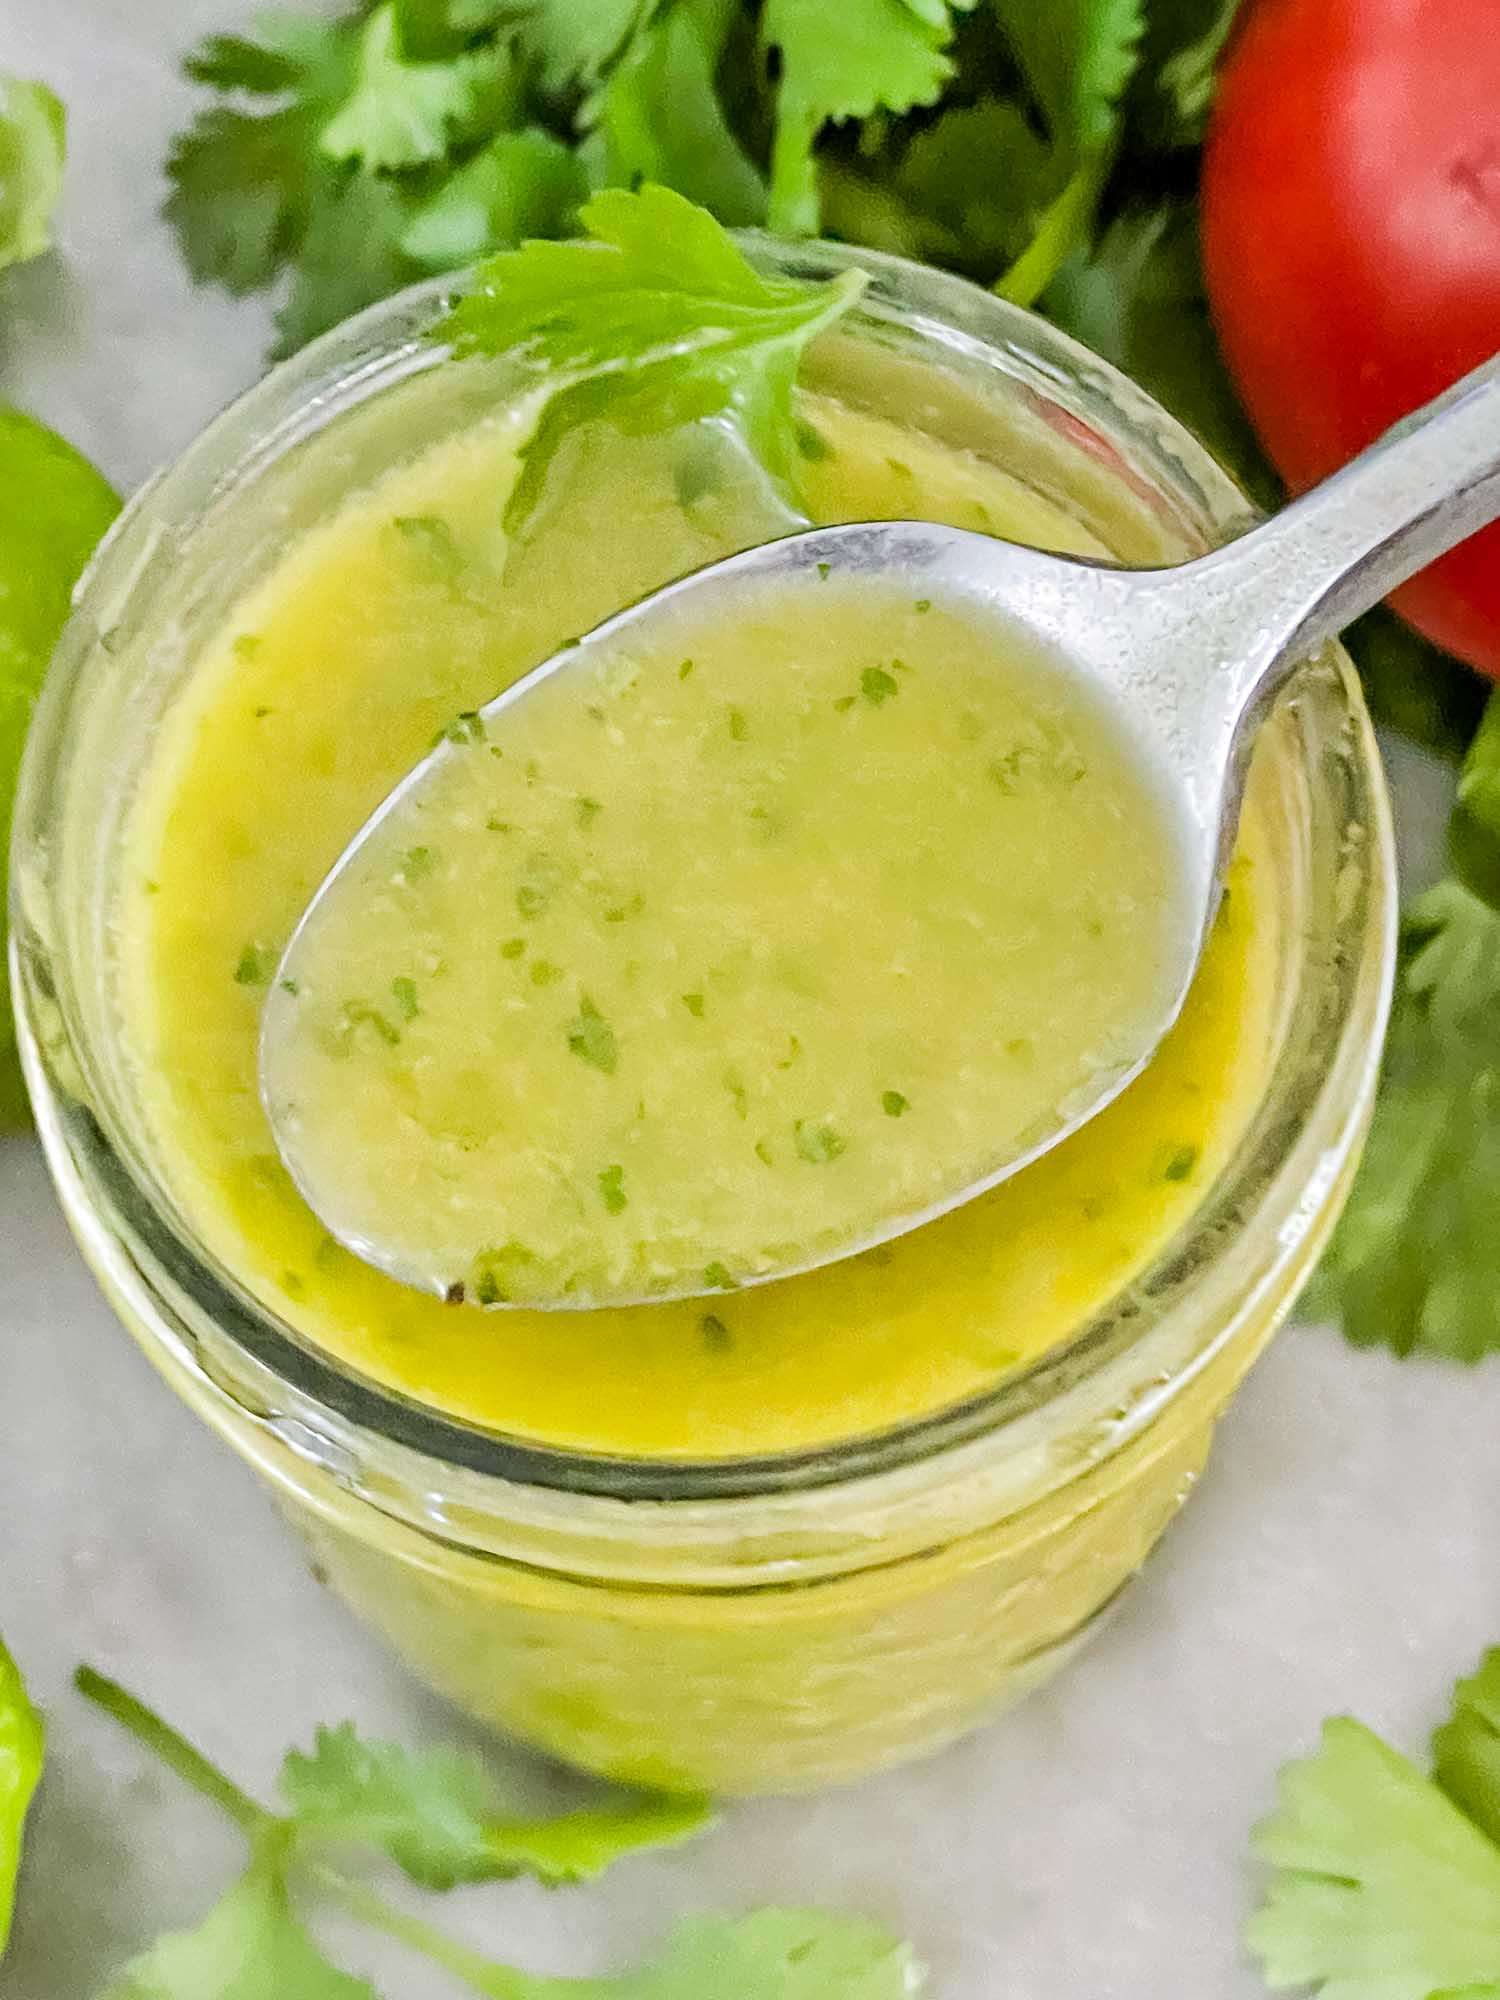 Top view of Cilantro Lime Vinaigrette Salad Dressing in a jar with a spoon full of the dressing coming out of it